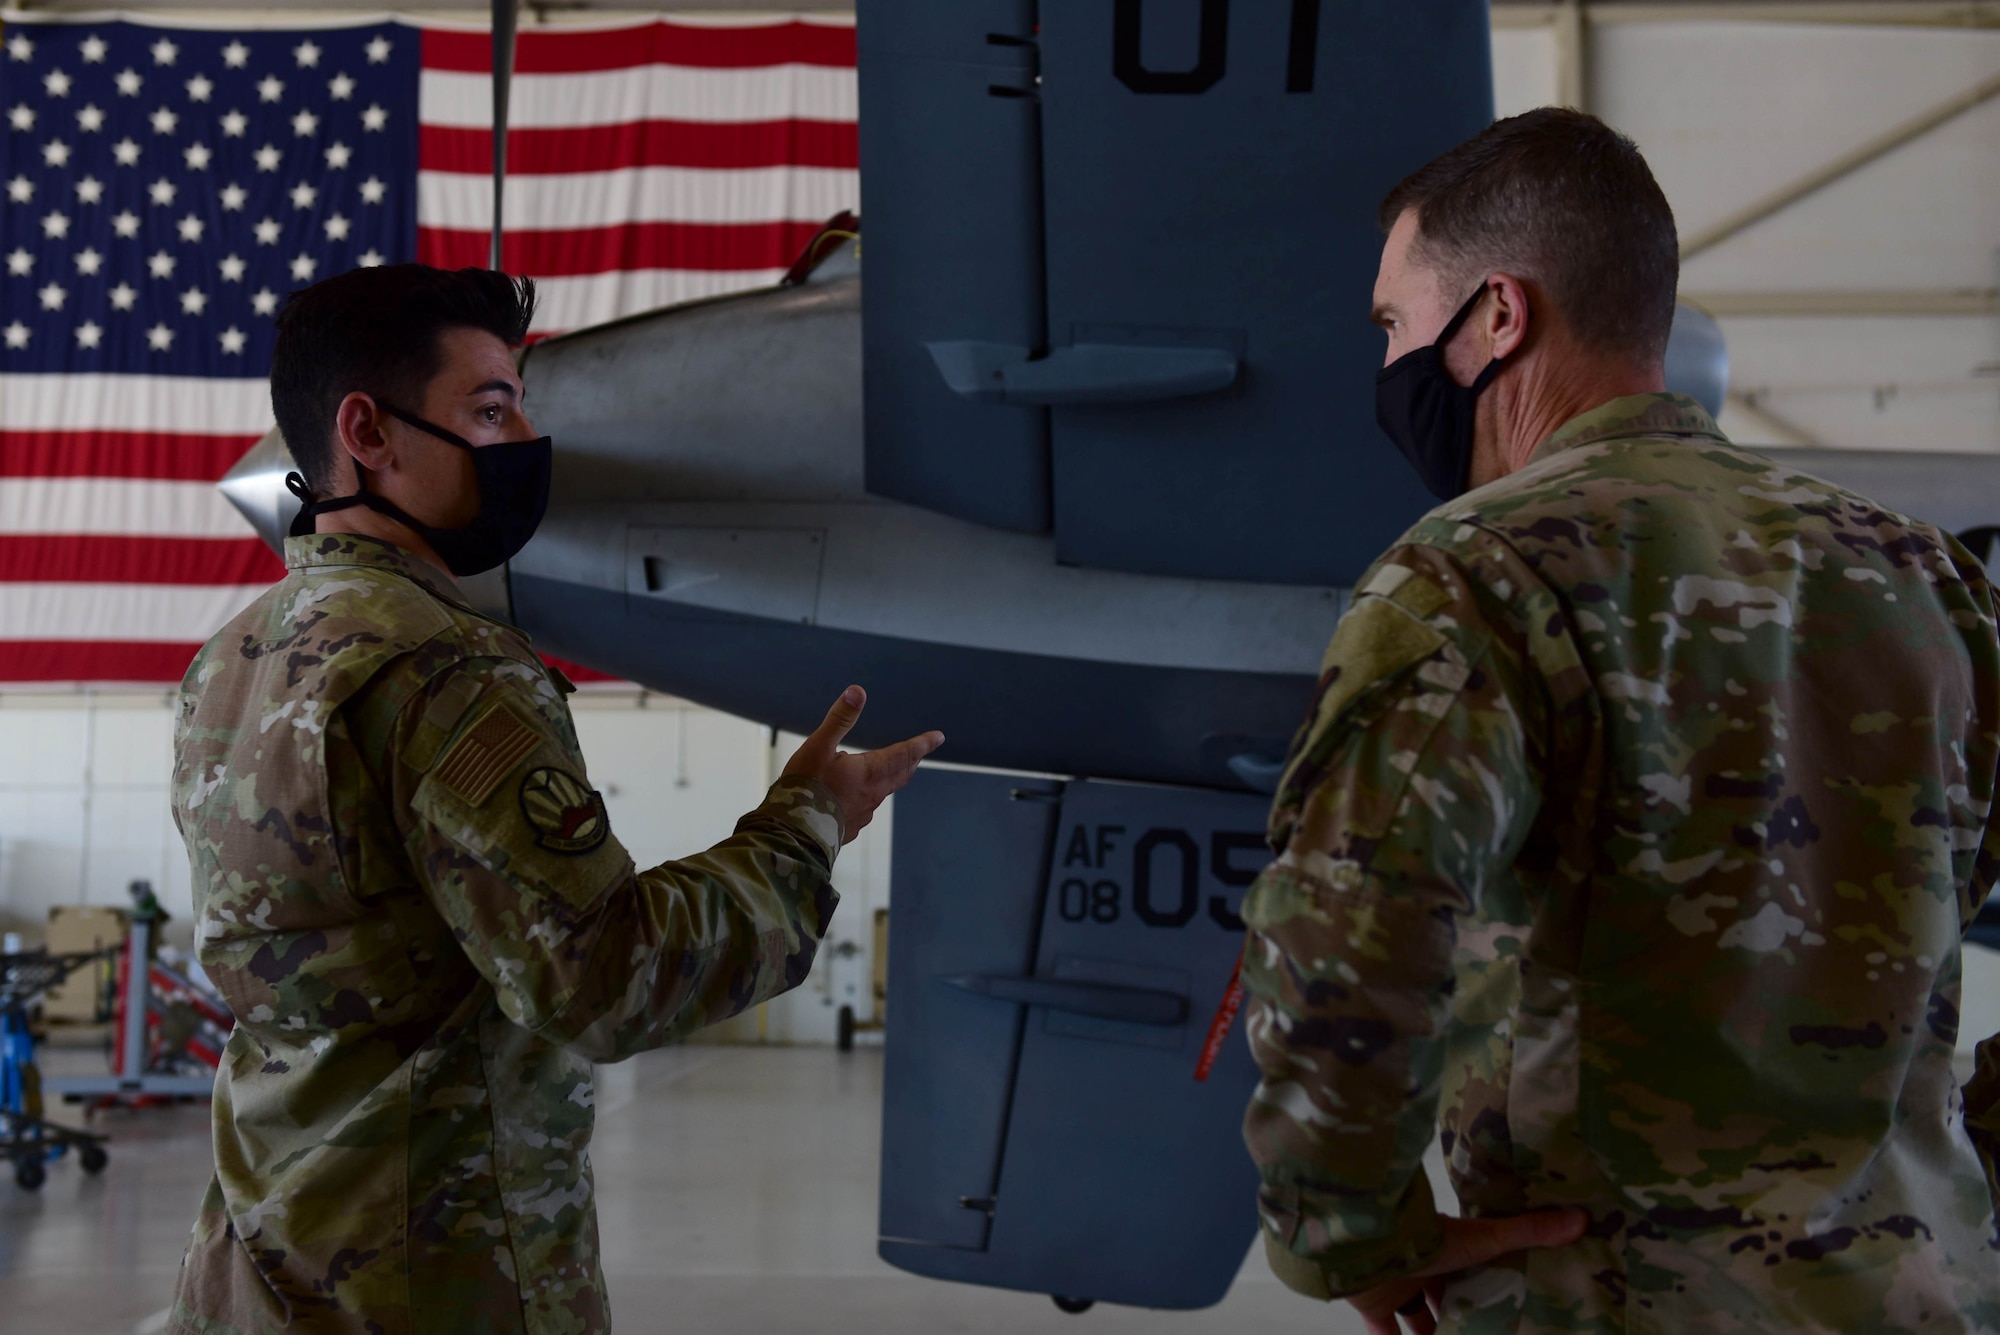 A Airman briefs a commander in front of an MQ-9 Reaper tail and United States flag.